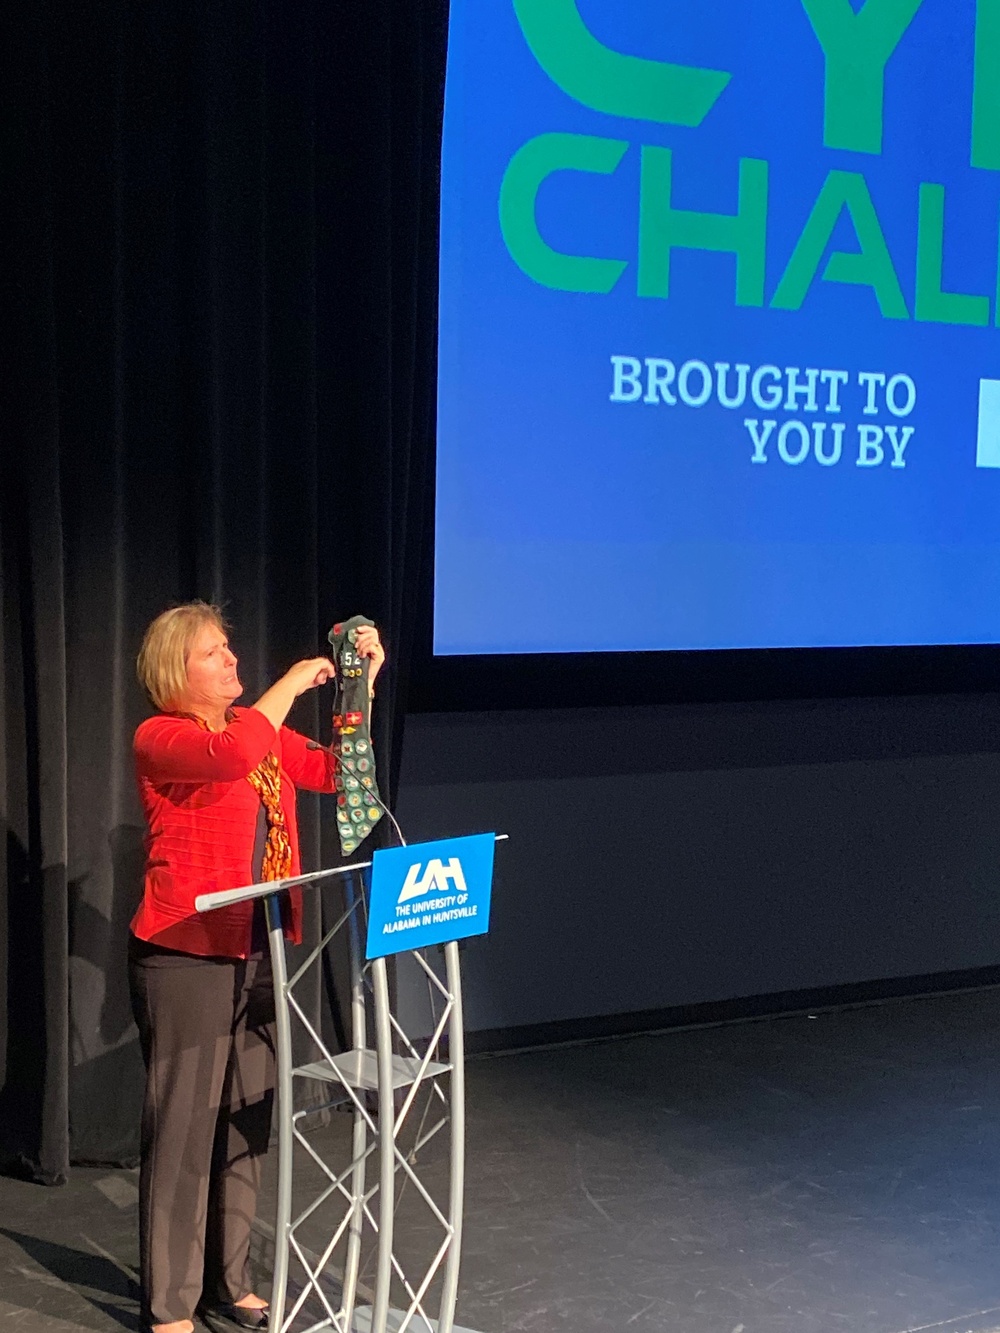 CCDC AvMC’s S3I director kicks off Girl Scouts inaugural cyber challenge